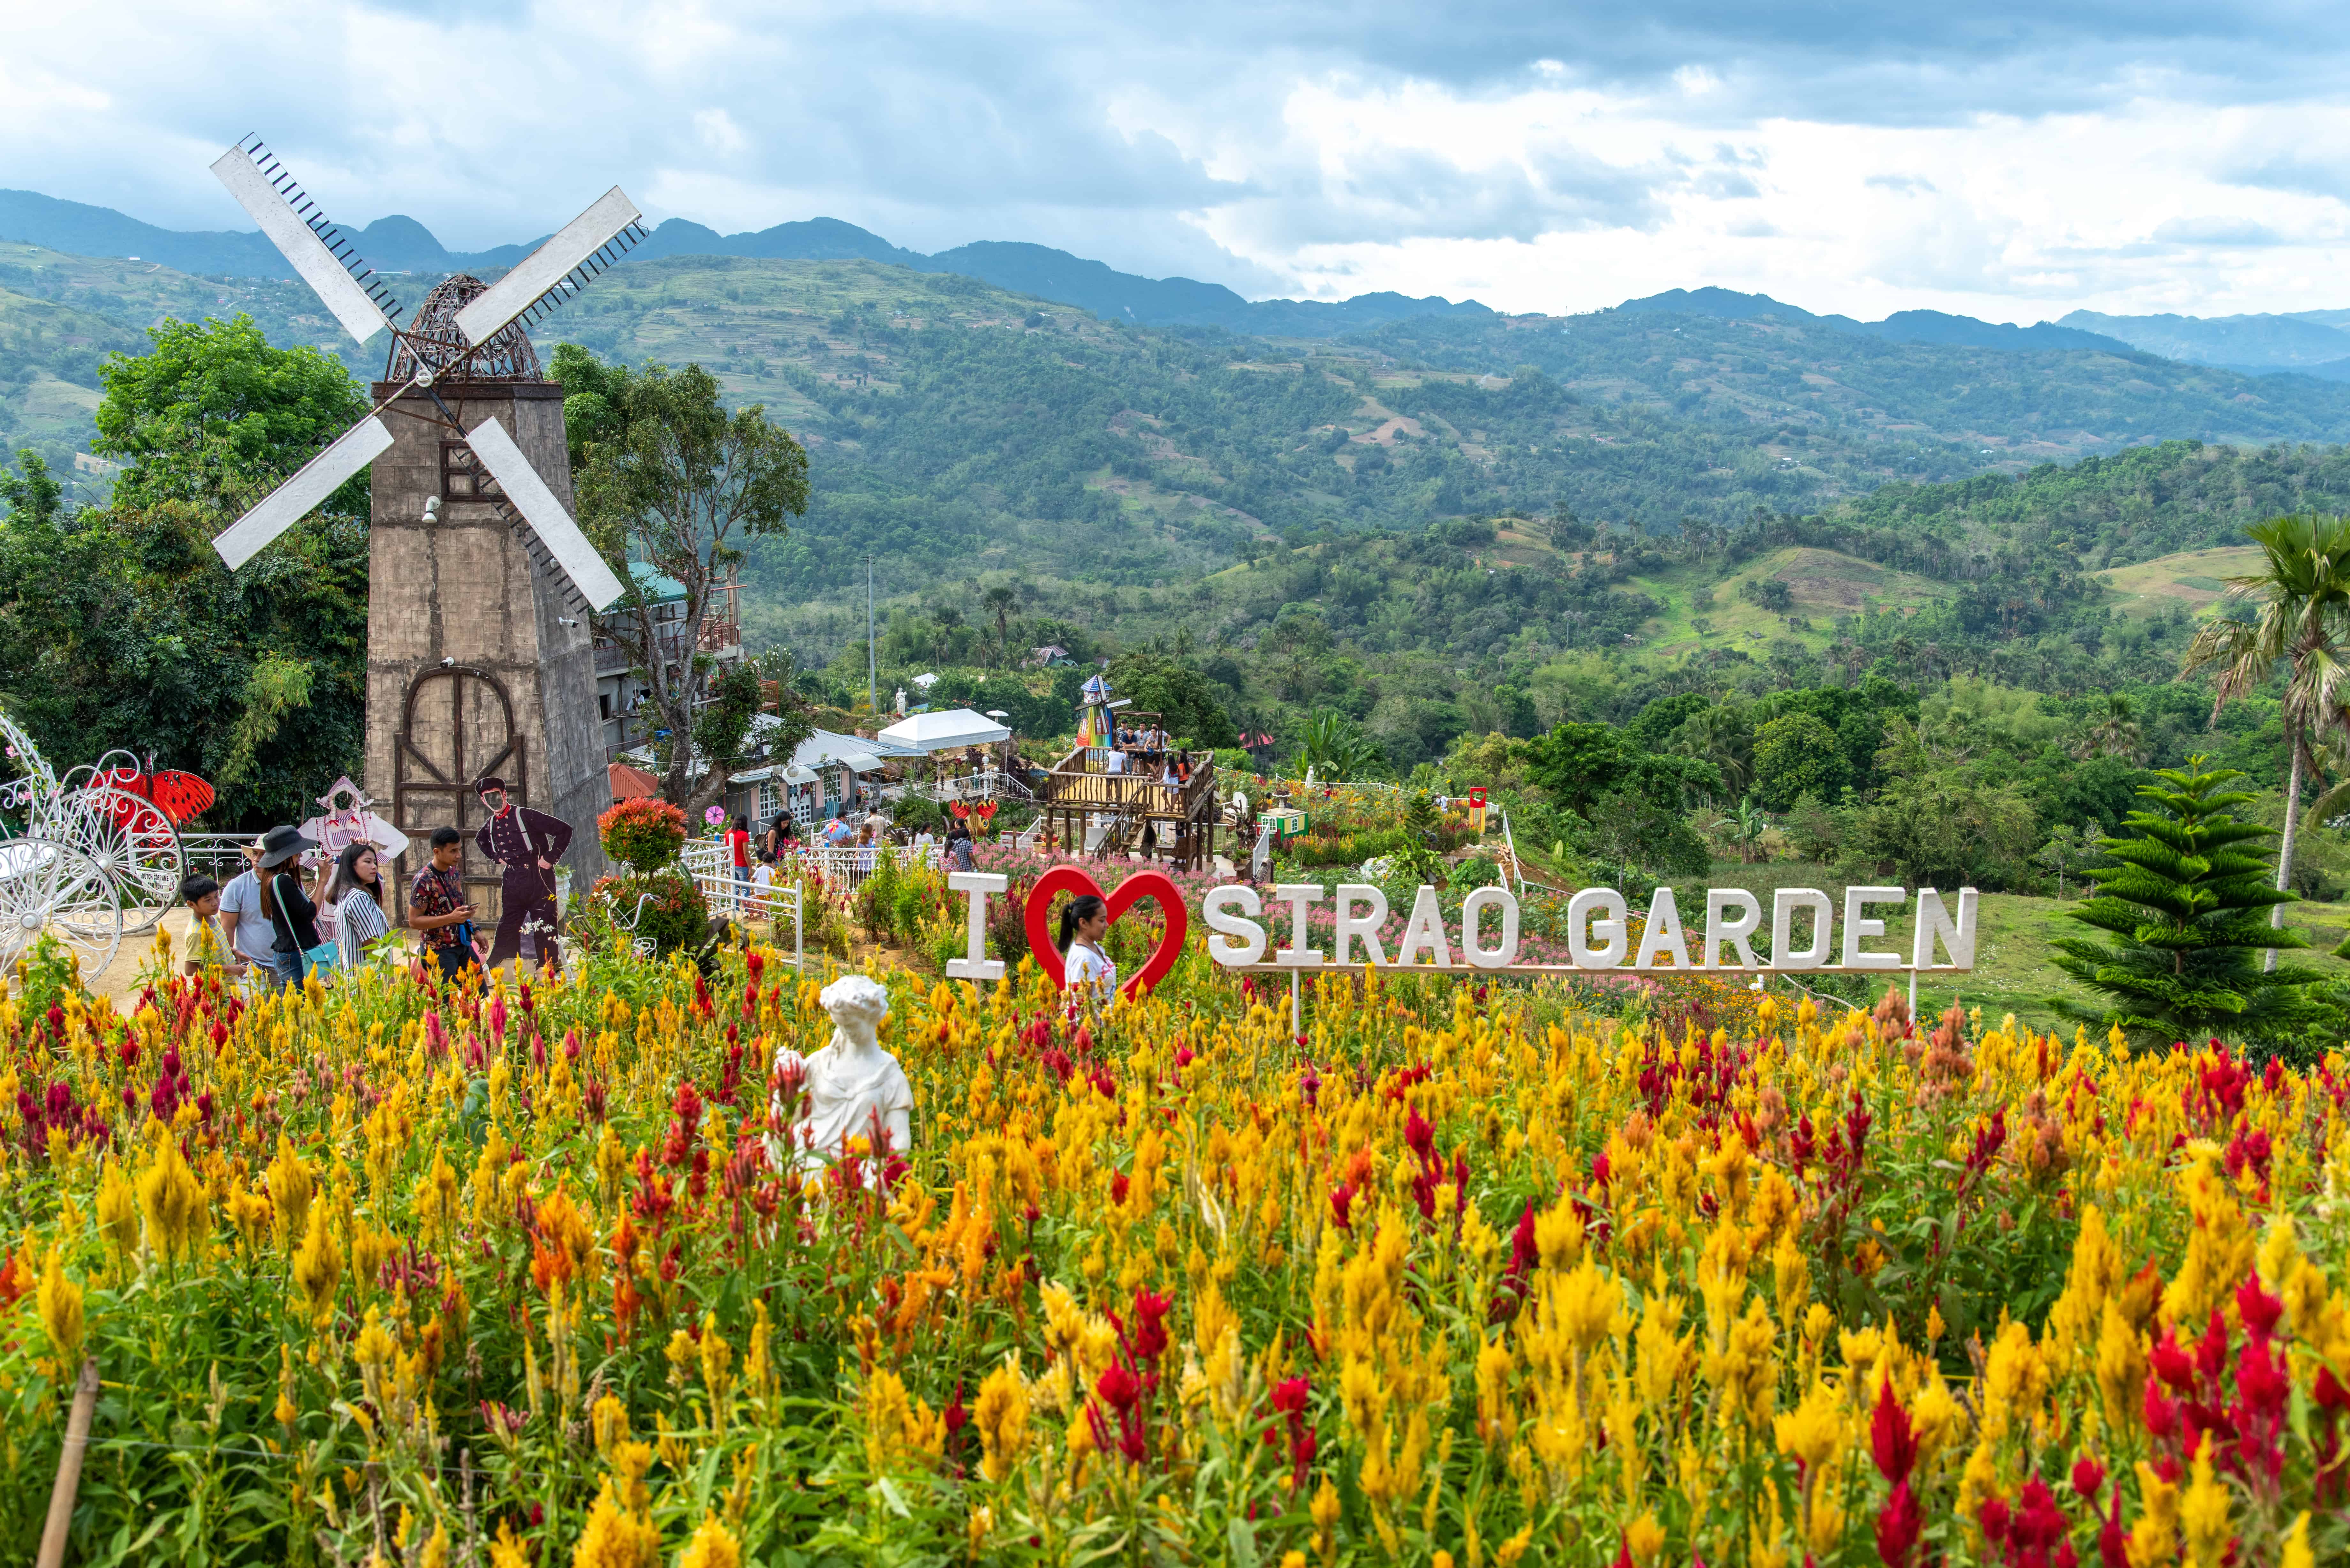 The Top of Cebu - Sirao Garden - Cebu Attractions: Guide for Backpackers